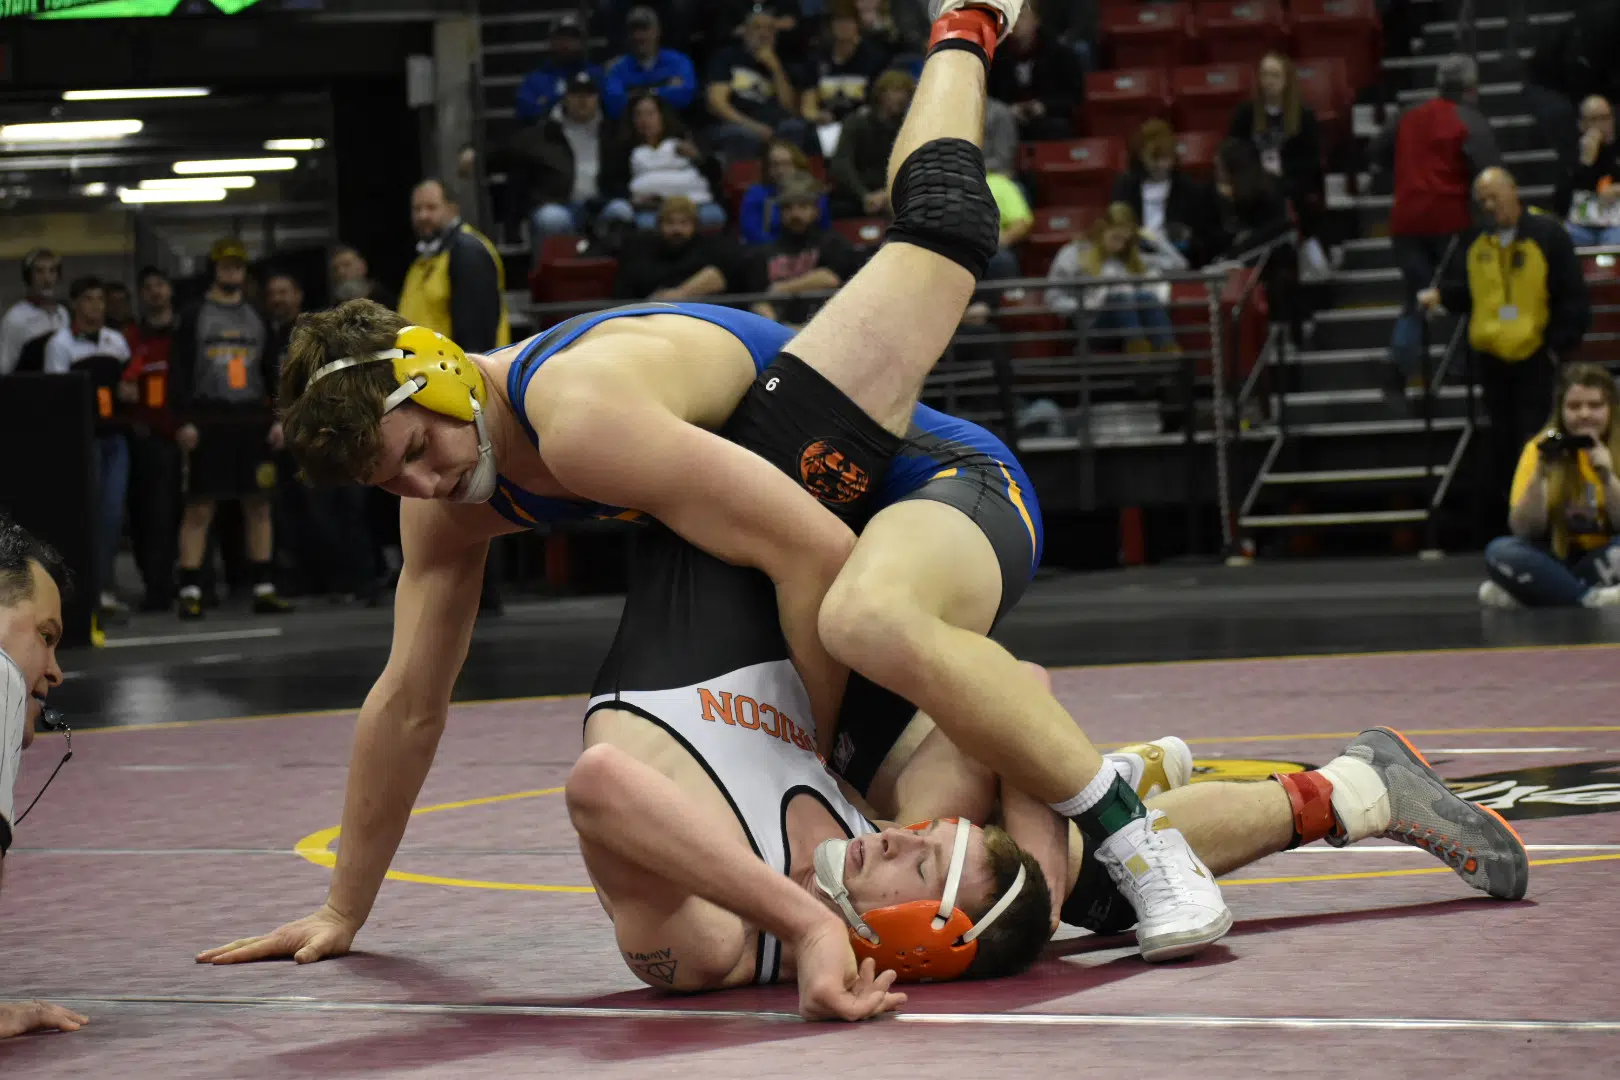 WIAA State Wrestling 21 Area Semifinalists In Division 2 and Division